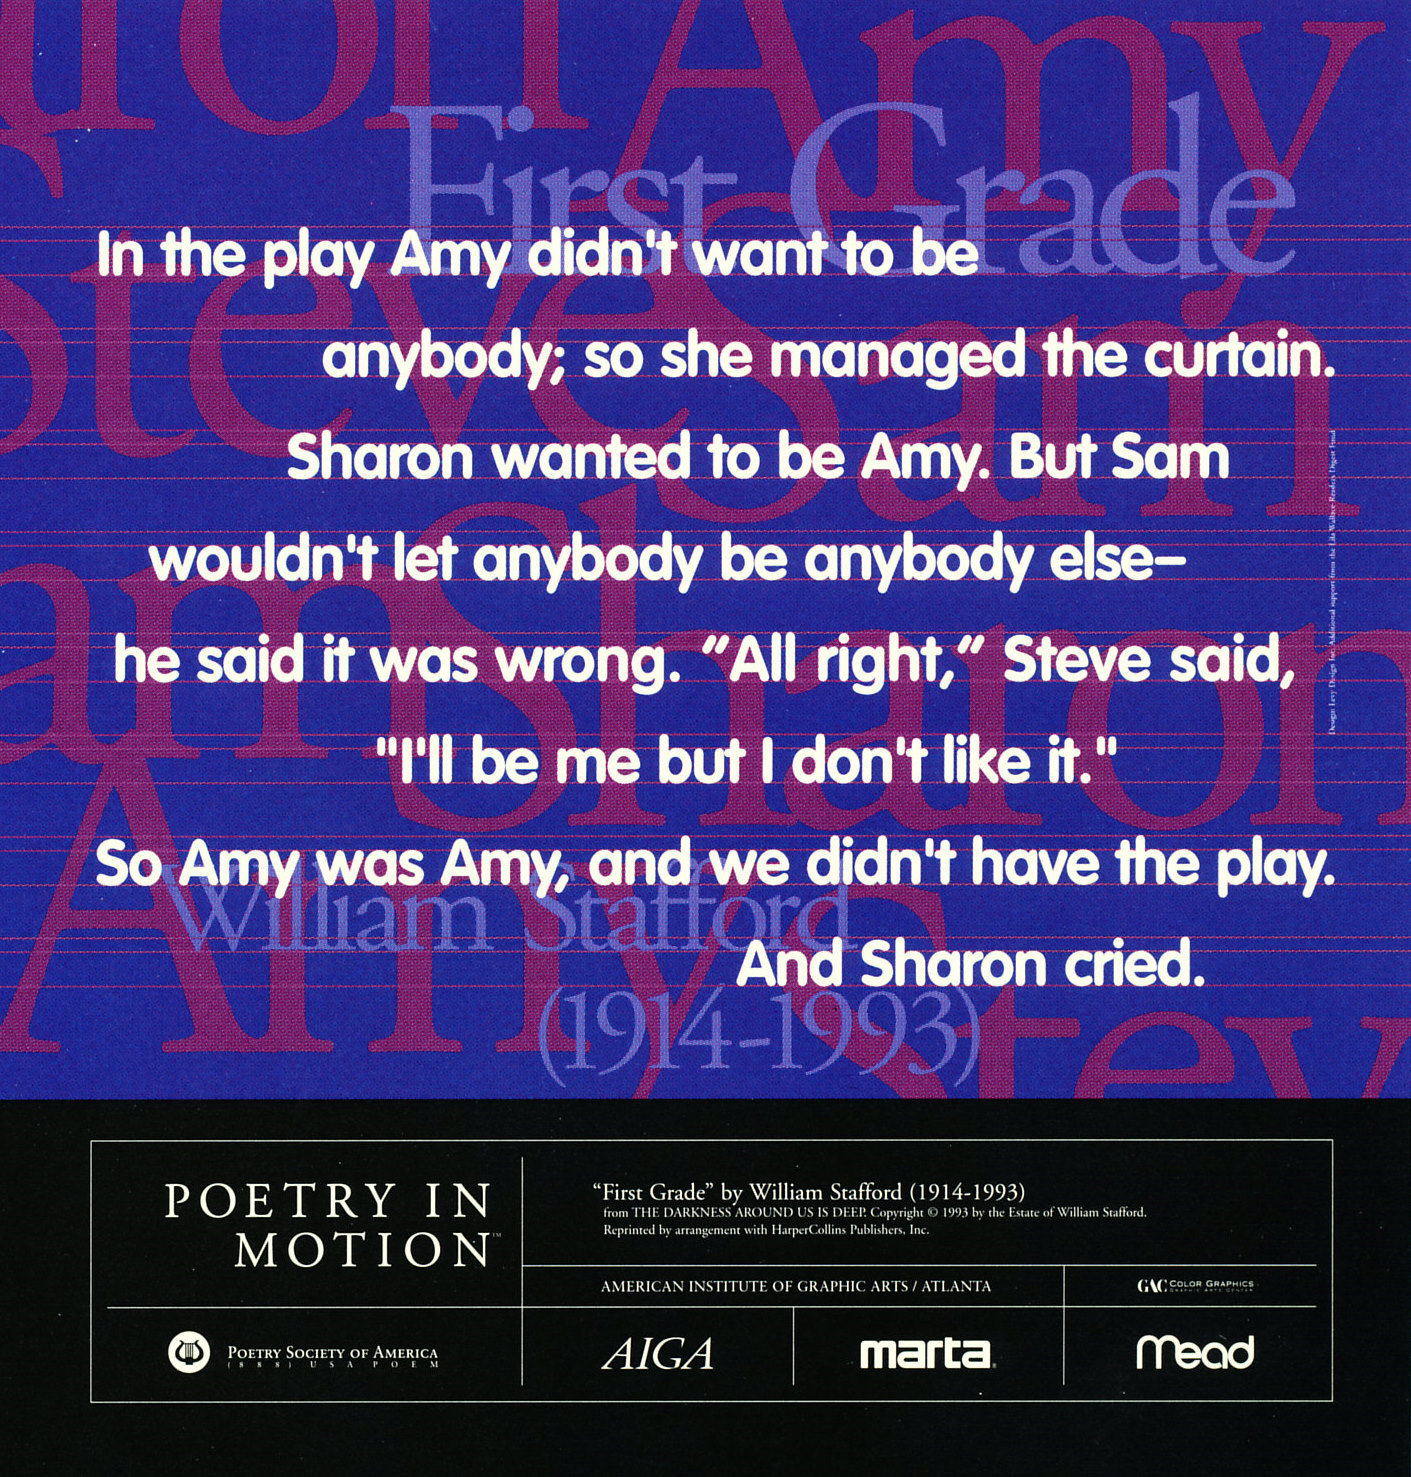 Purple poster resembling lined paper features a poem titled First Grade by William Stafford in white text. Behind the text, names from the poem appear in large magenta letters.